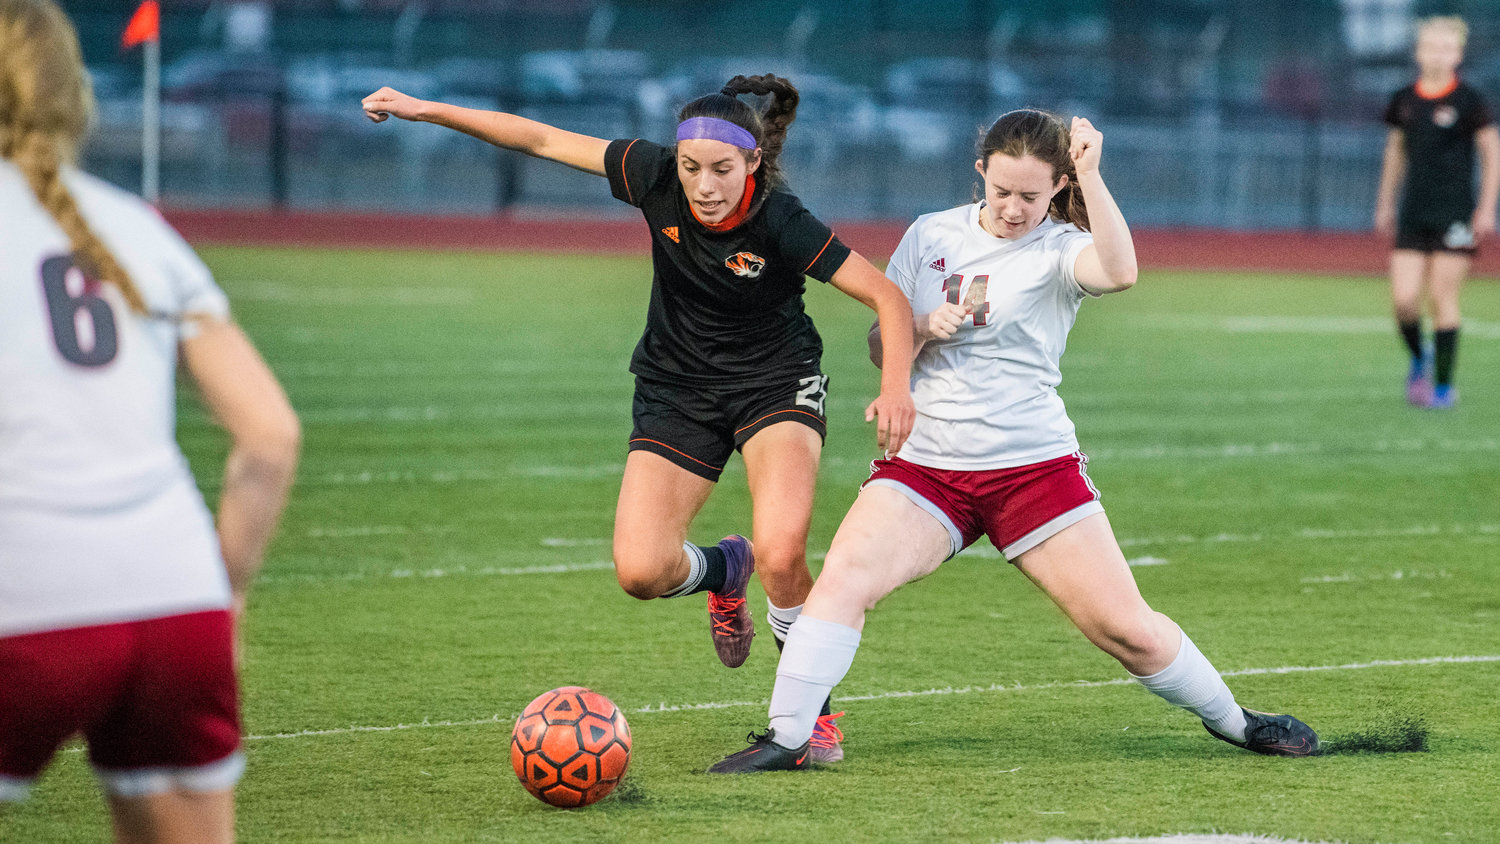 Centralia junior Jade Hudson (21) takes control of the ball during a Thursday night game against W.F. West.